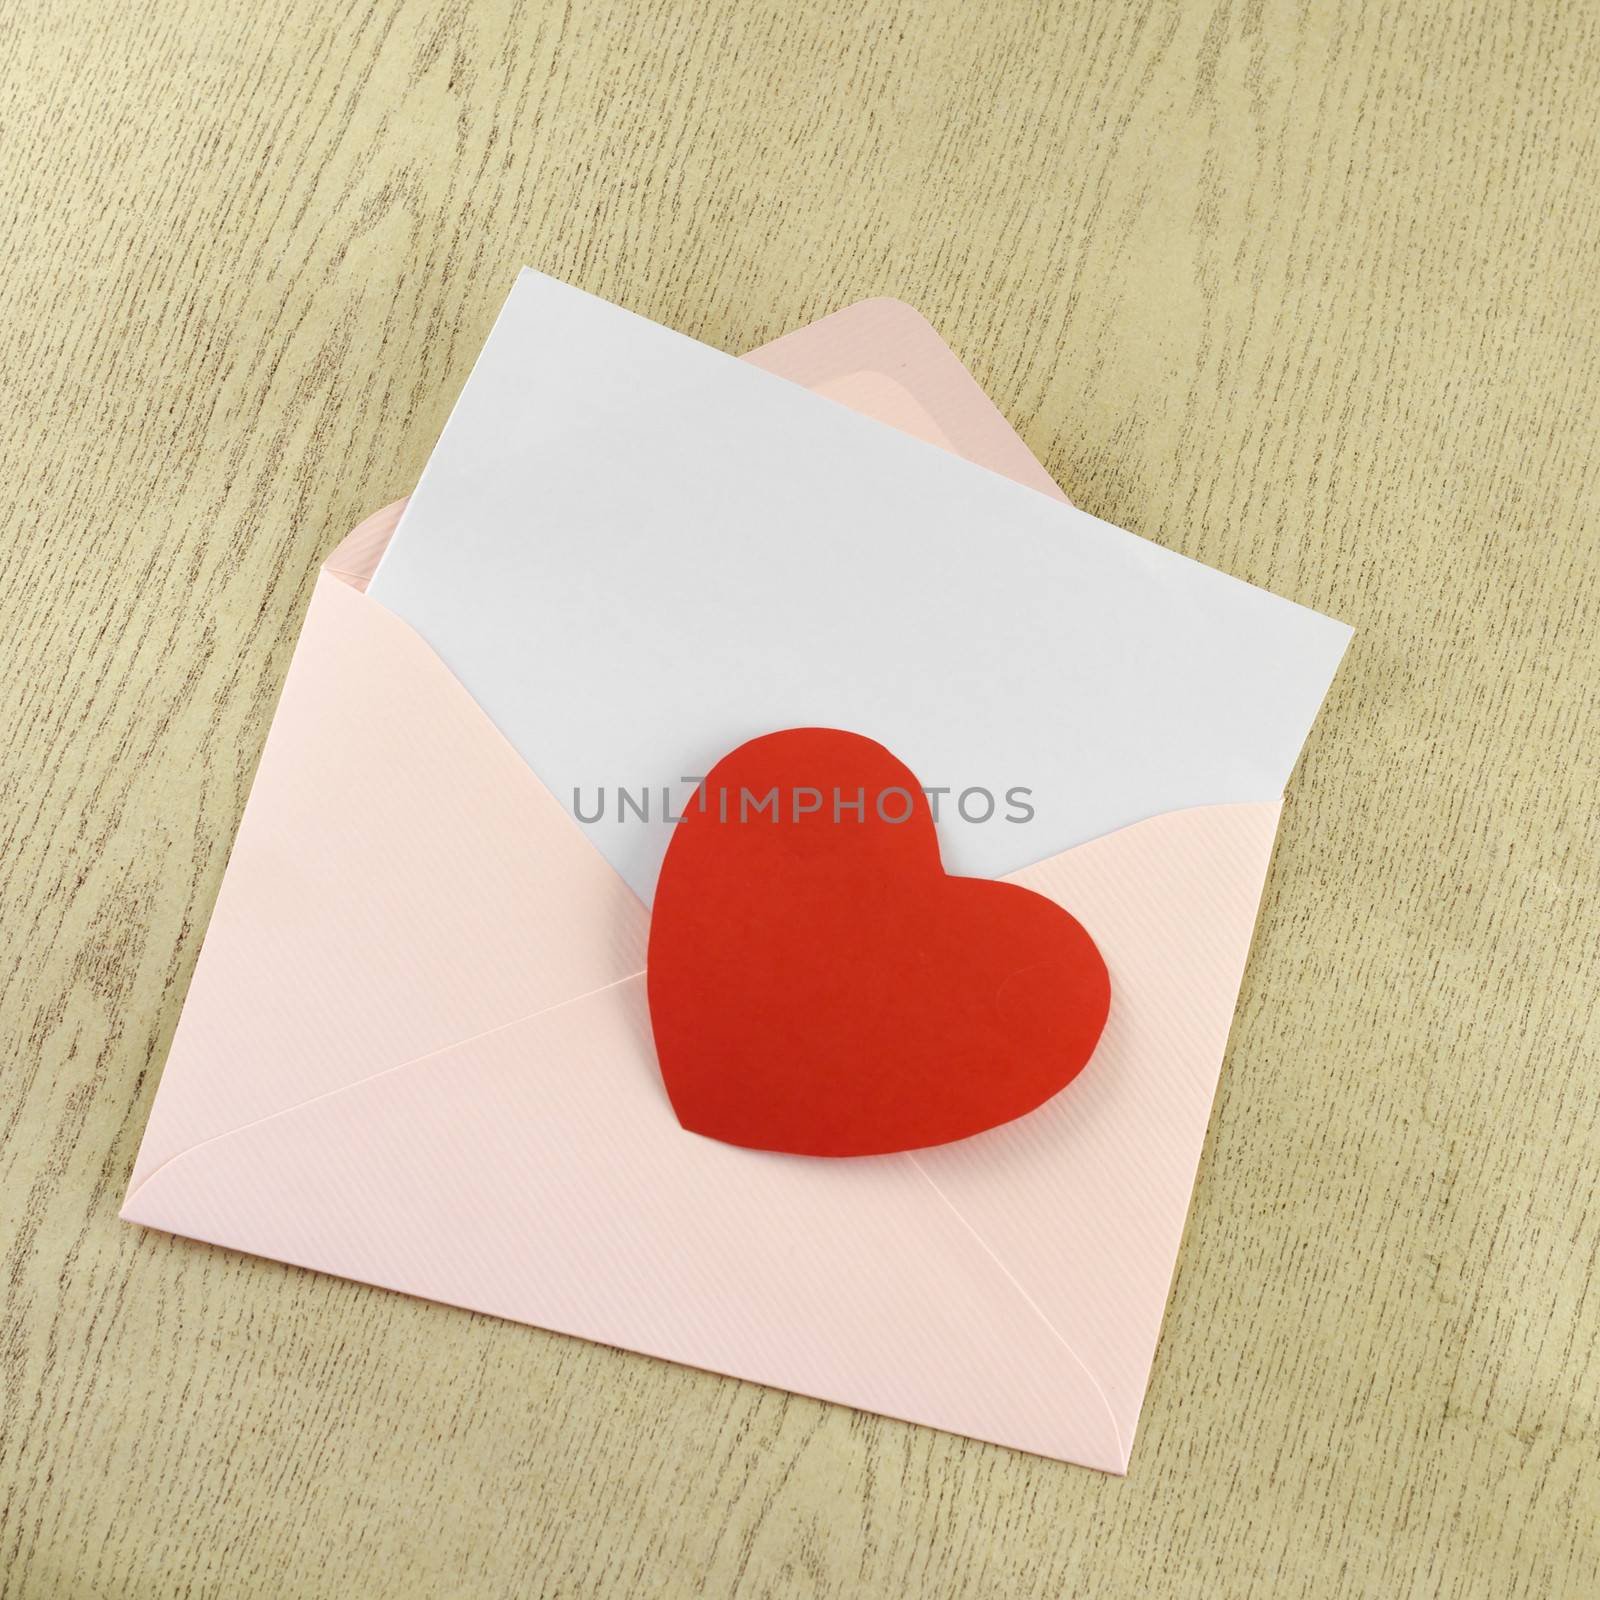 red heart with pink envelope on wooden background